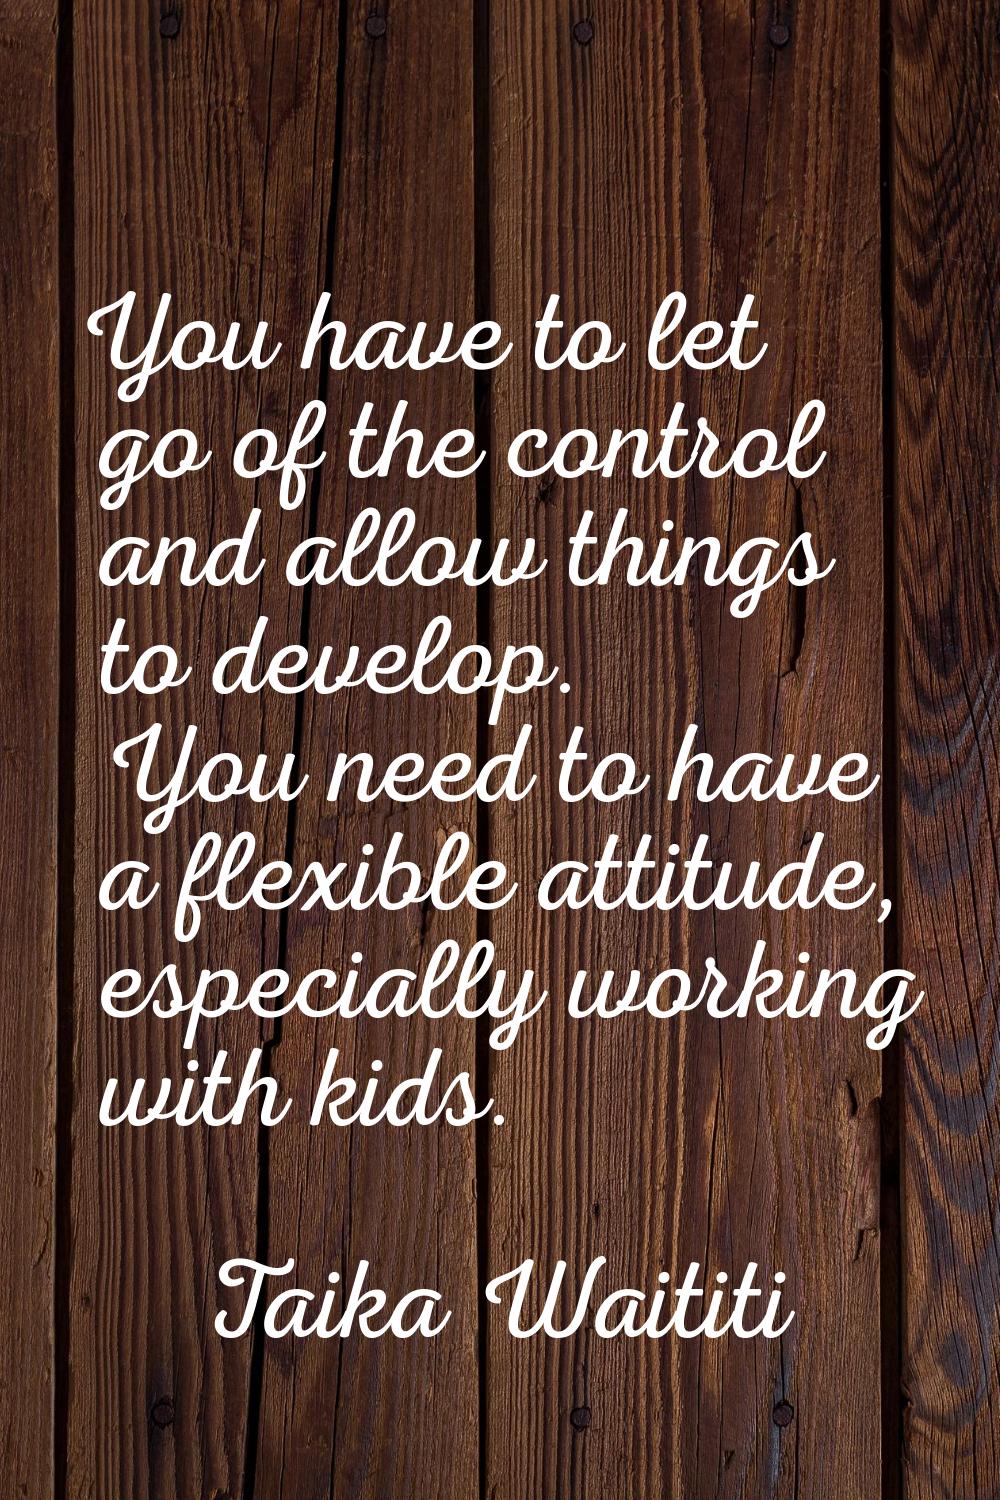 You have to let go of the control and allow things to develop. You need to have a flexible attitude